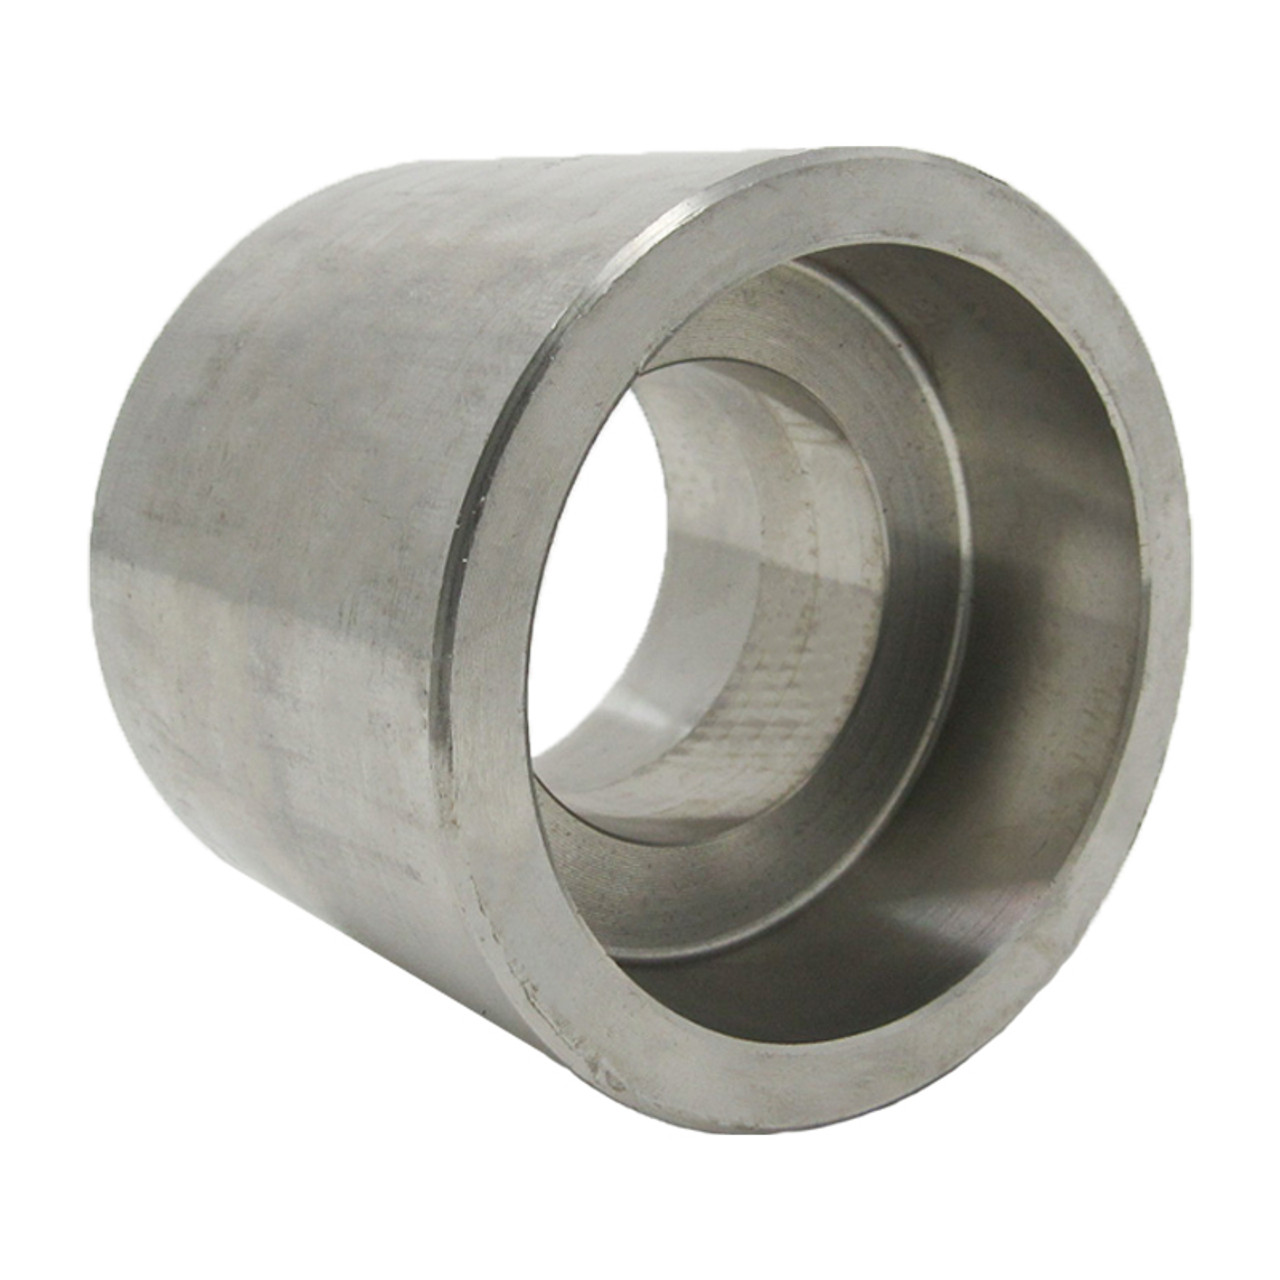 2" x 3/4" Reducing Coupling, 3000# Socket Weld Stainless Steel 316/316L  A/SA182